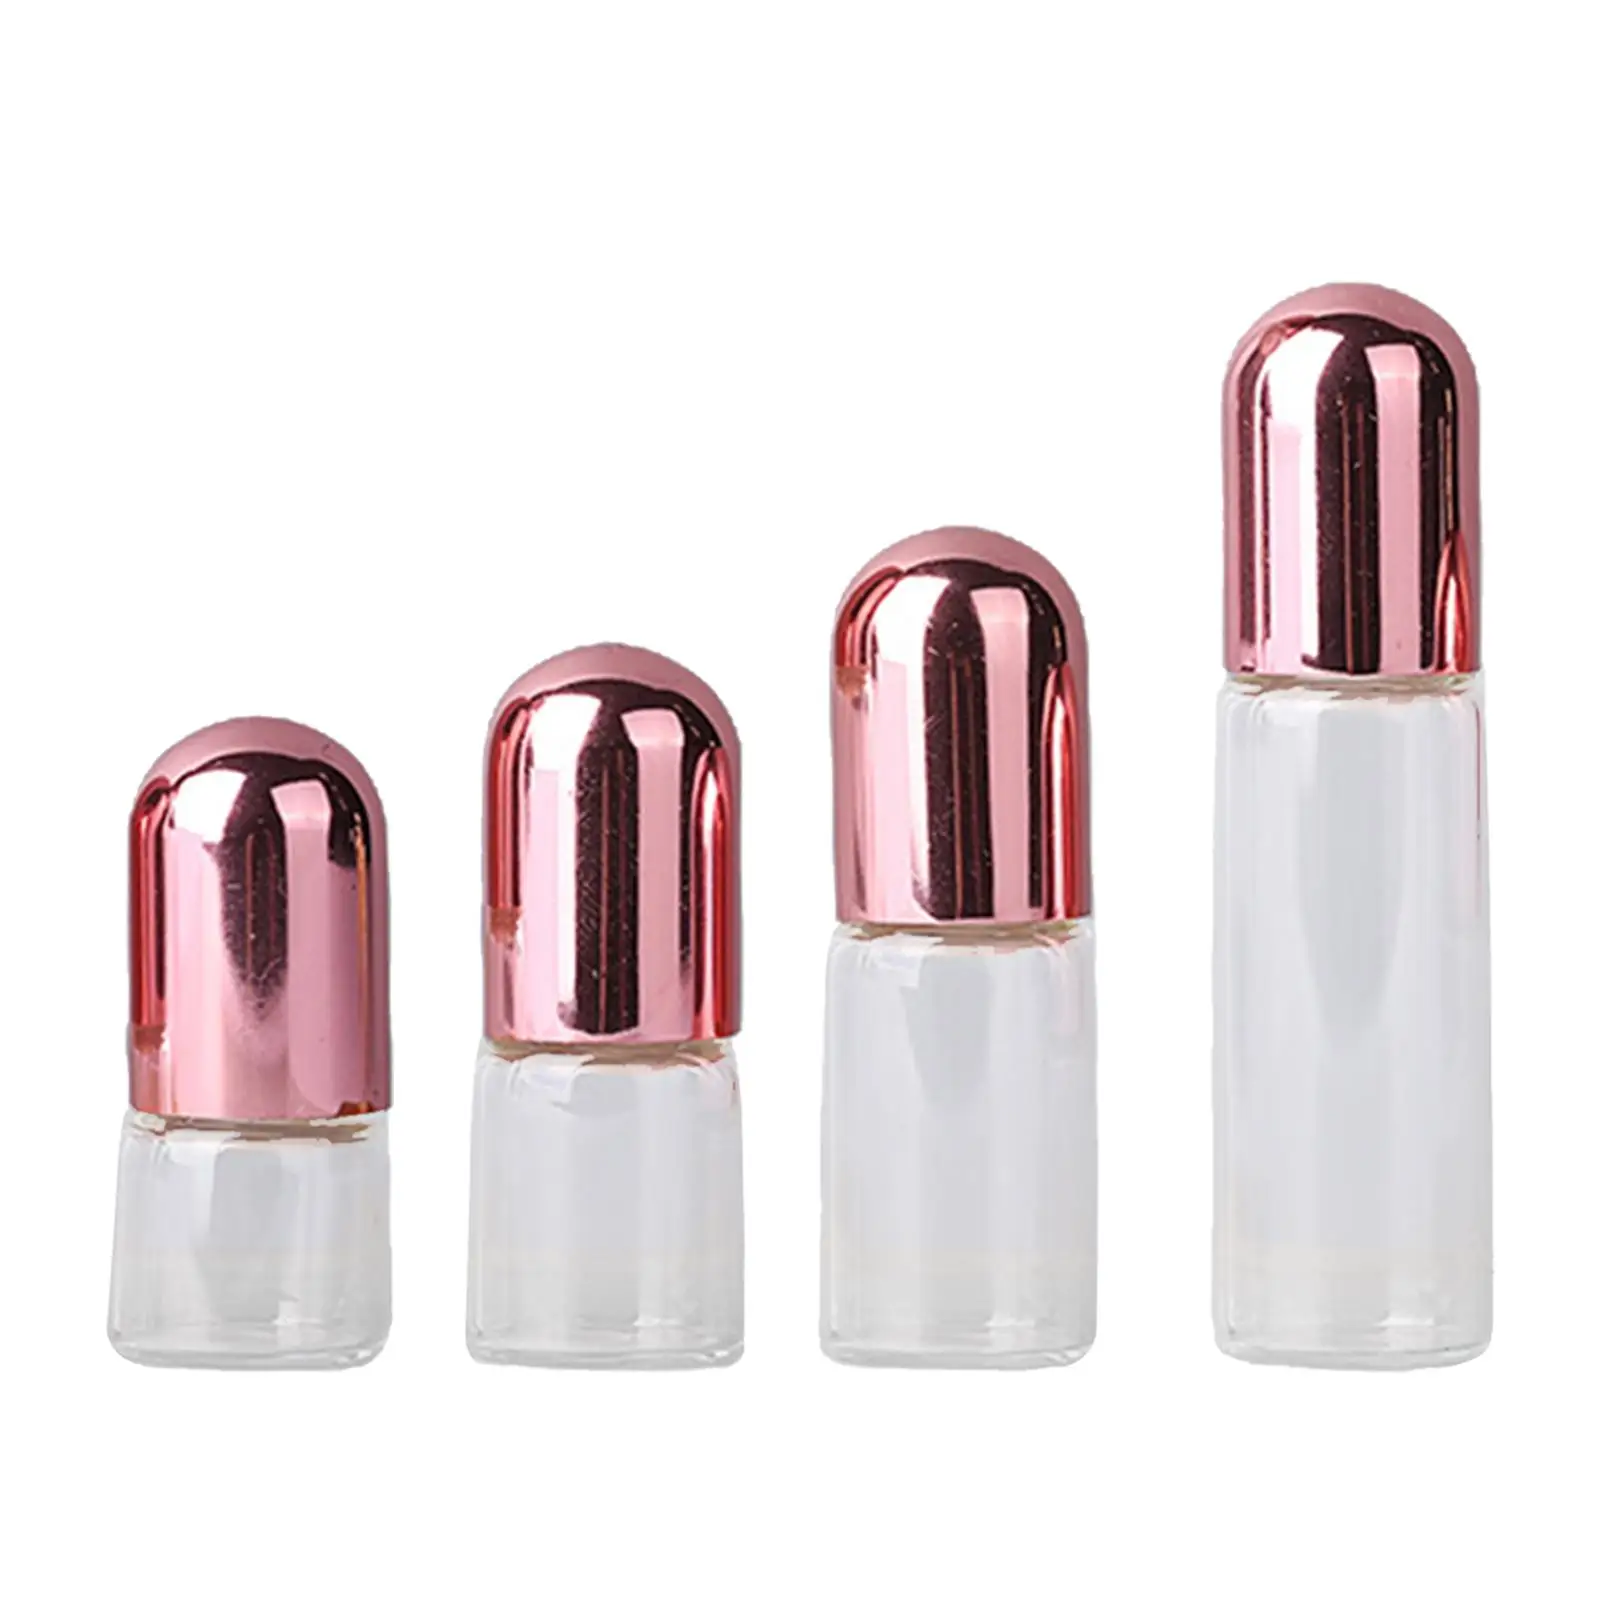 10 Pieces Essential Oil Roller Bottles with Pink Lids Practical Clear Perfume Sample Bottles Glass Roll Perfume Bottles Empty images - 6